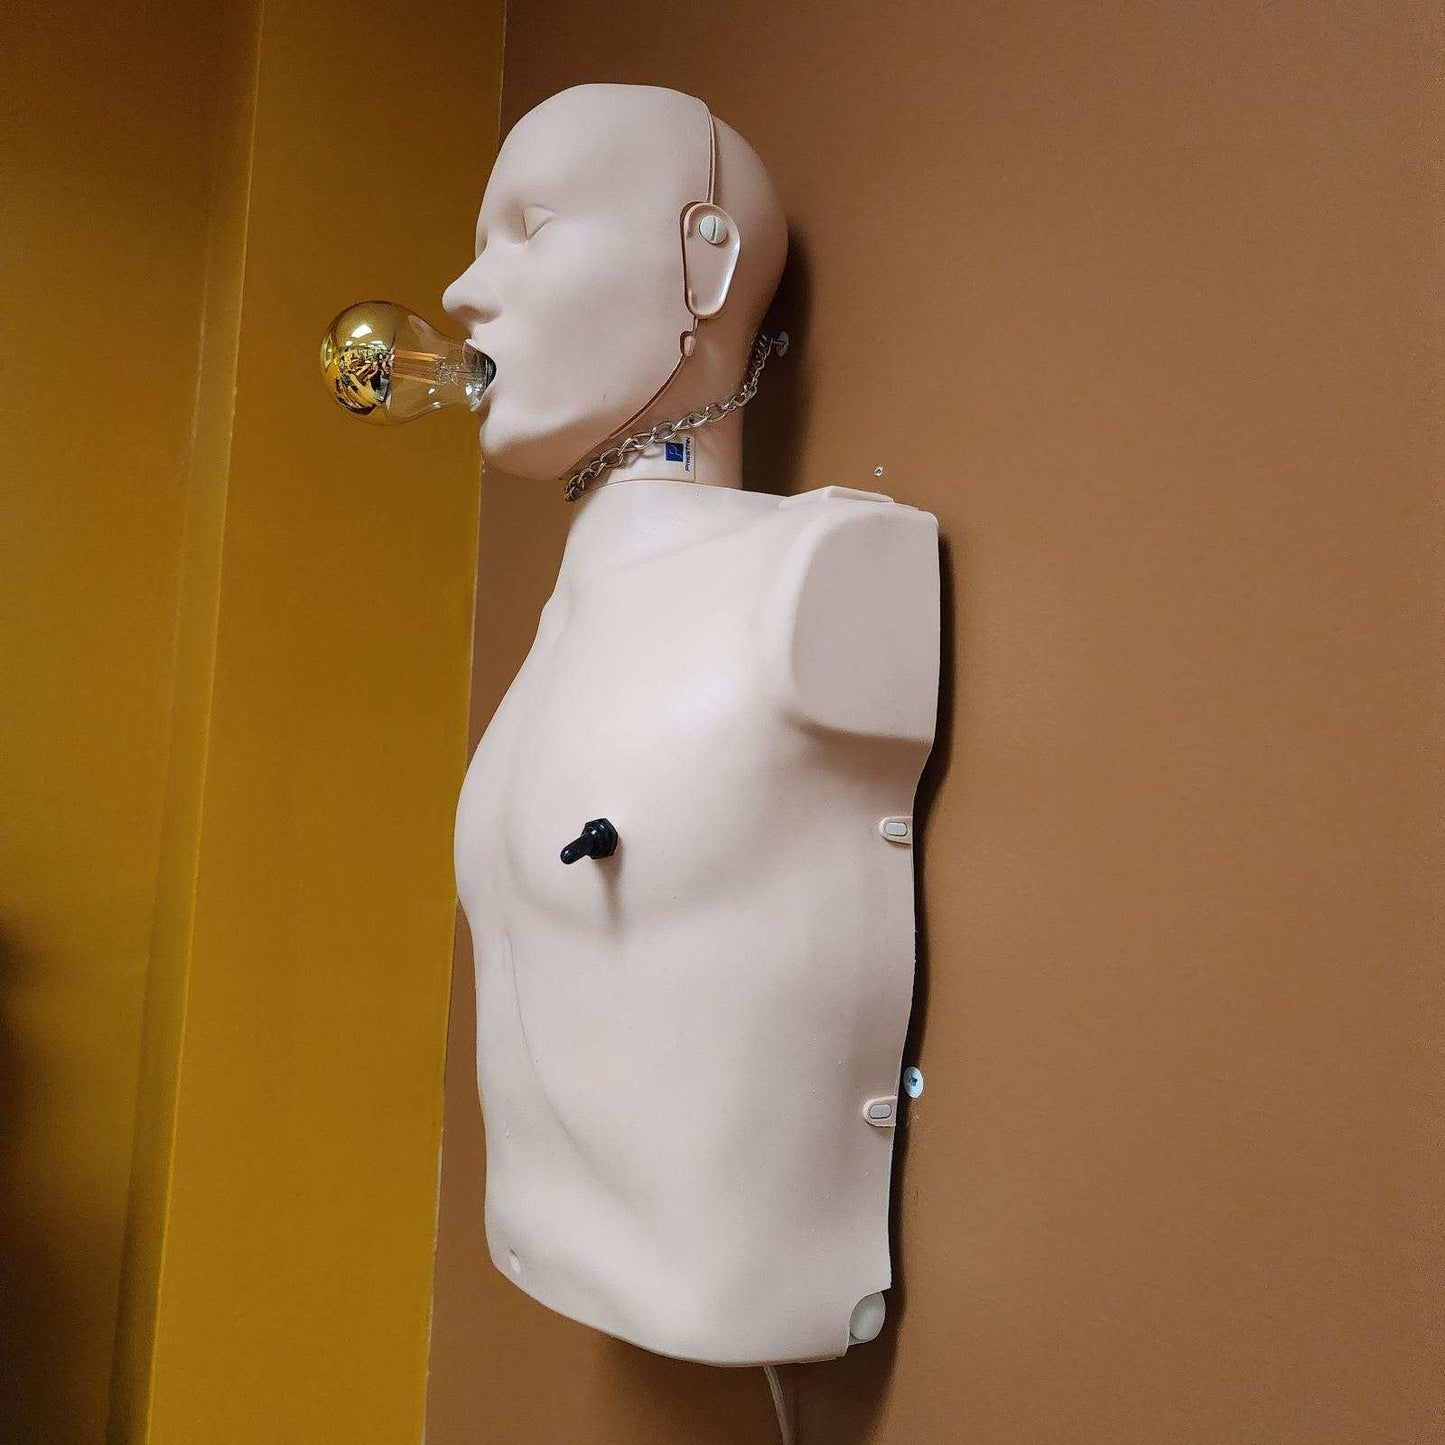 Lighted CPR Dummies Sconce Light Fixtures